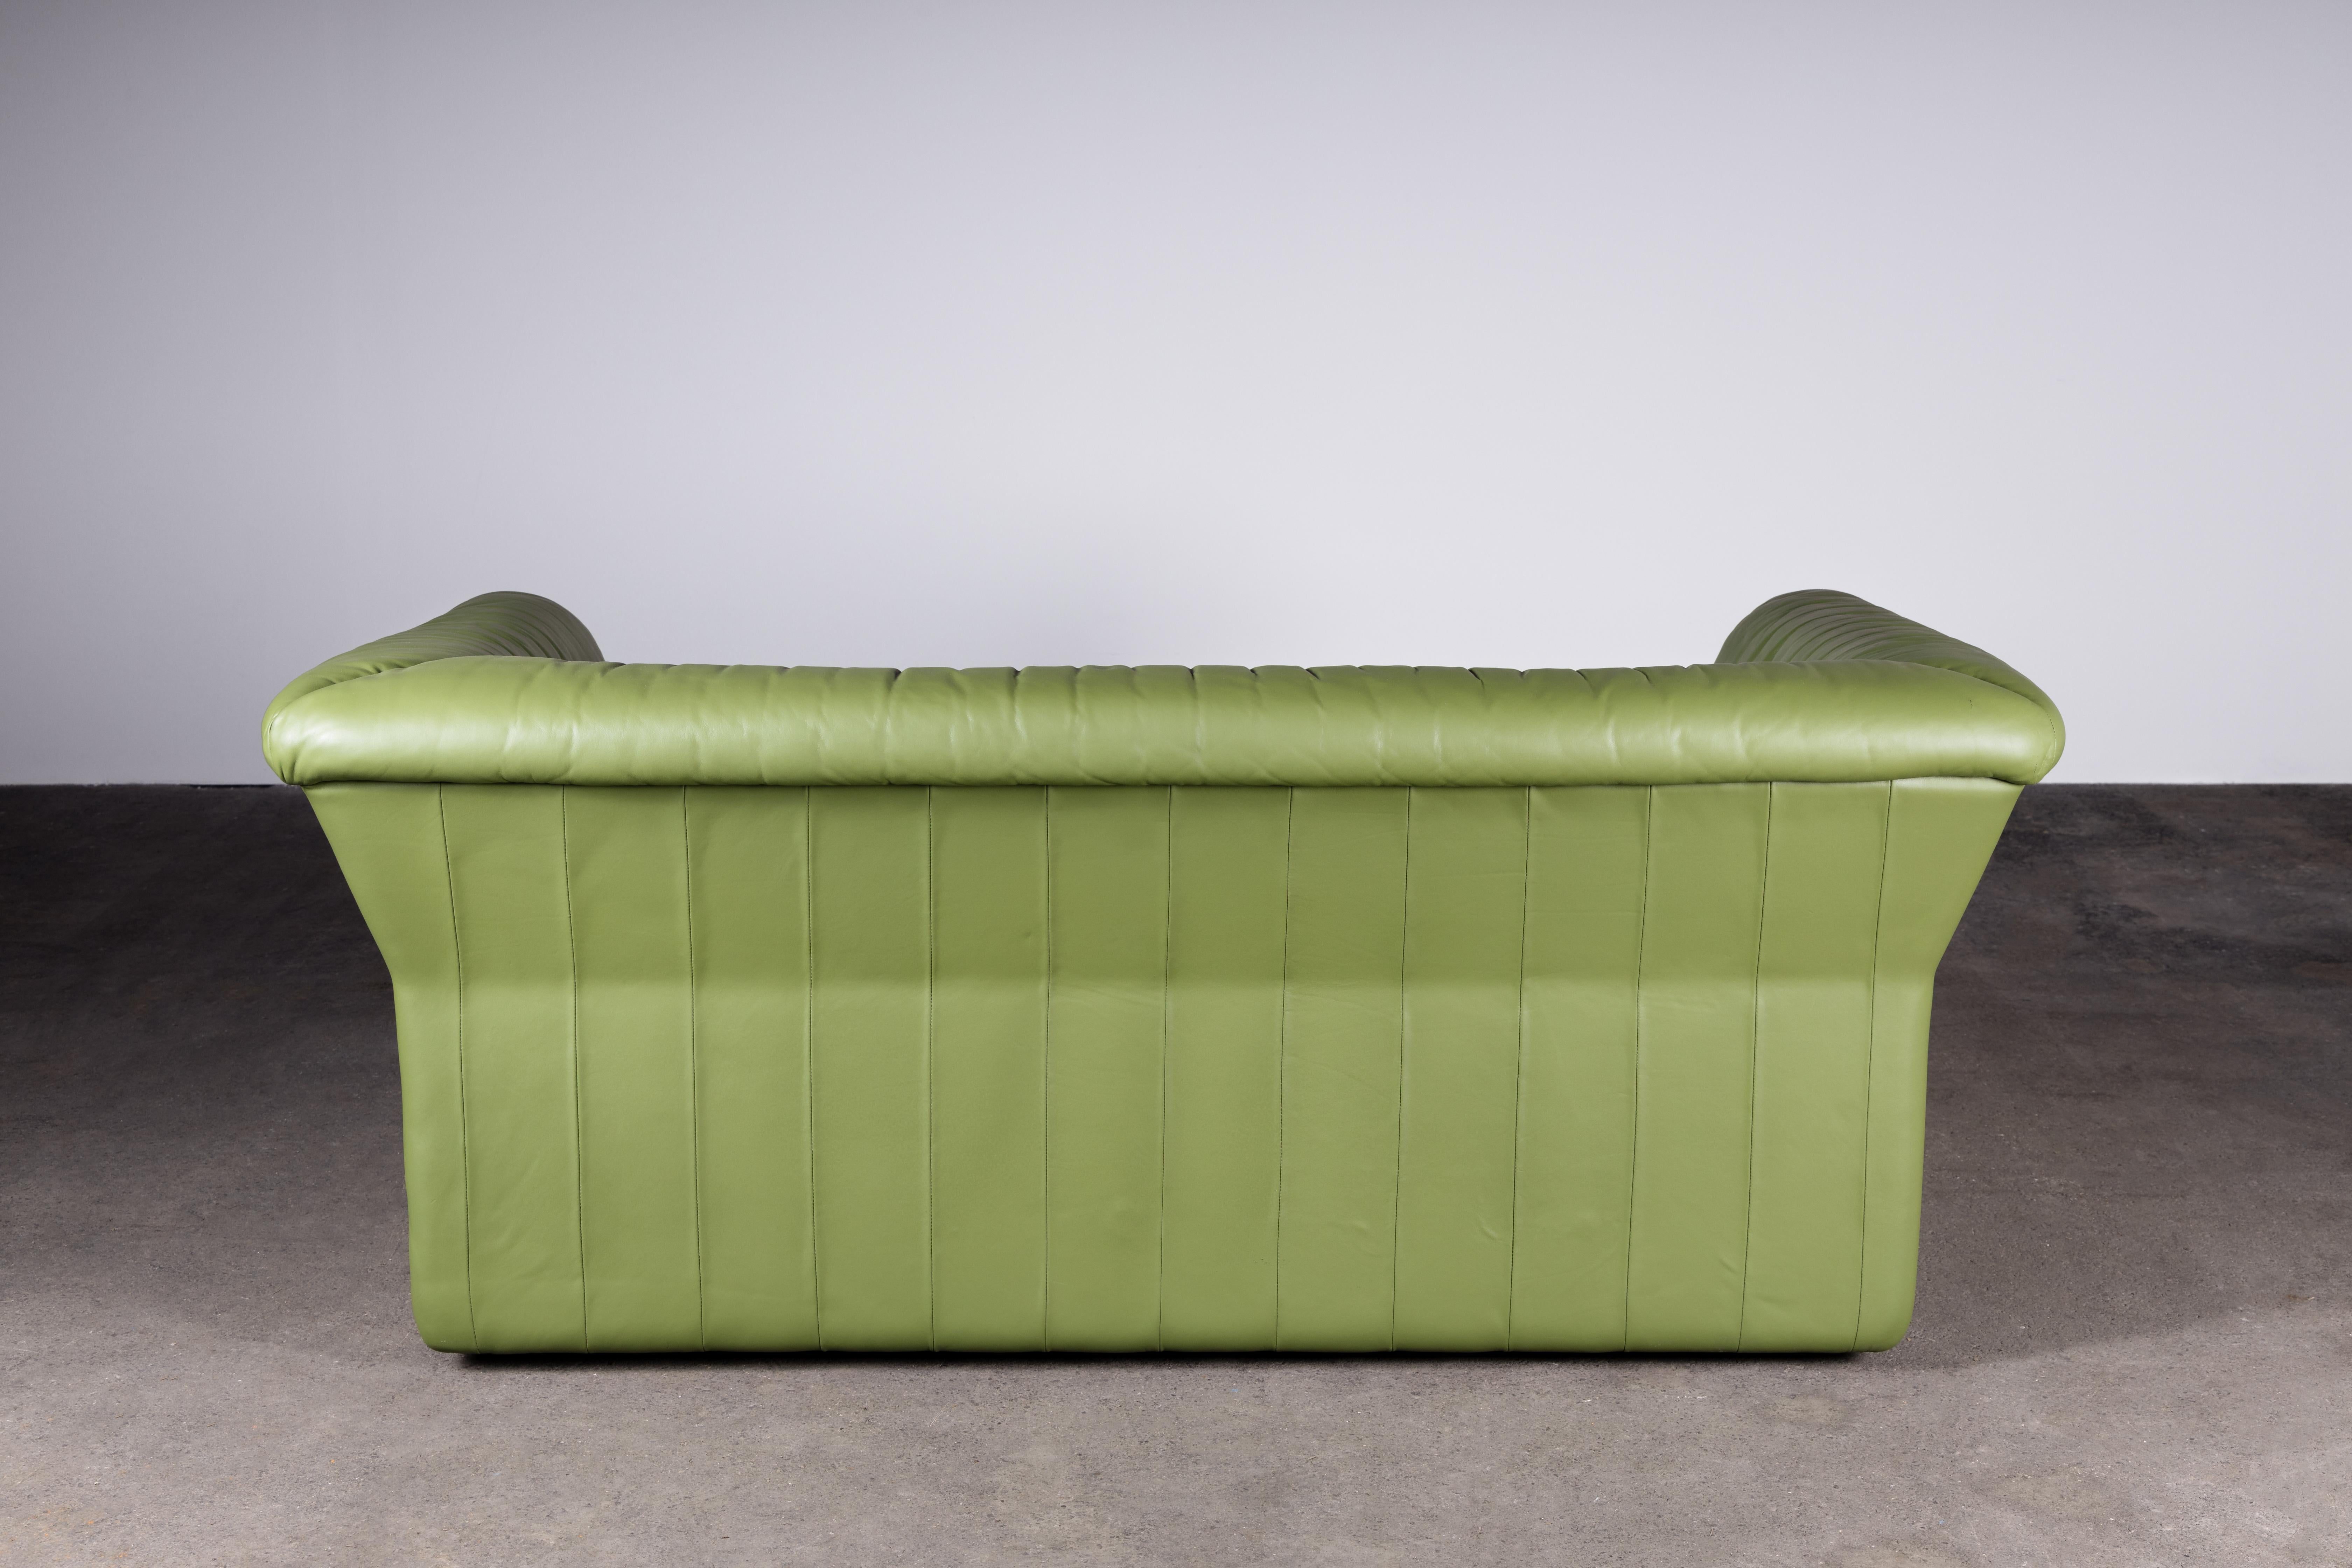 Swiss Chic Mid-Century Modern Green Leather Sofa / Loveseat by De Sede For Sale